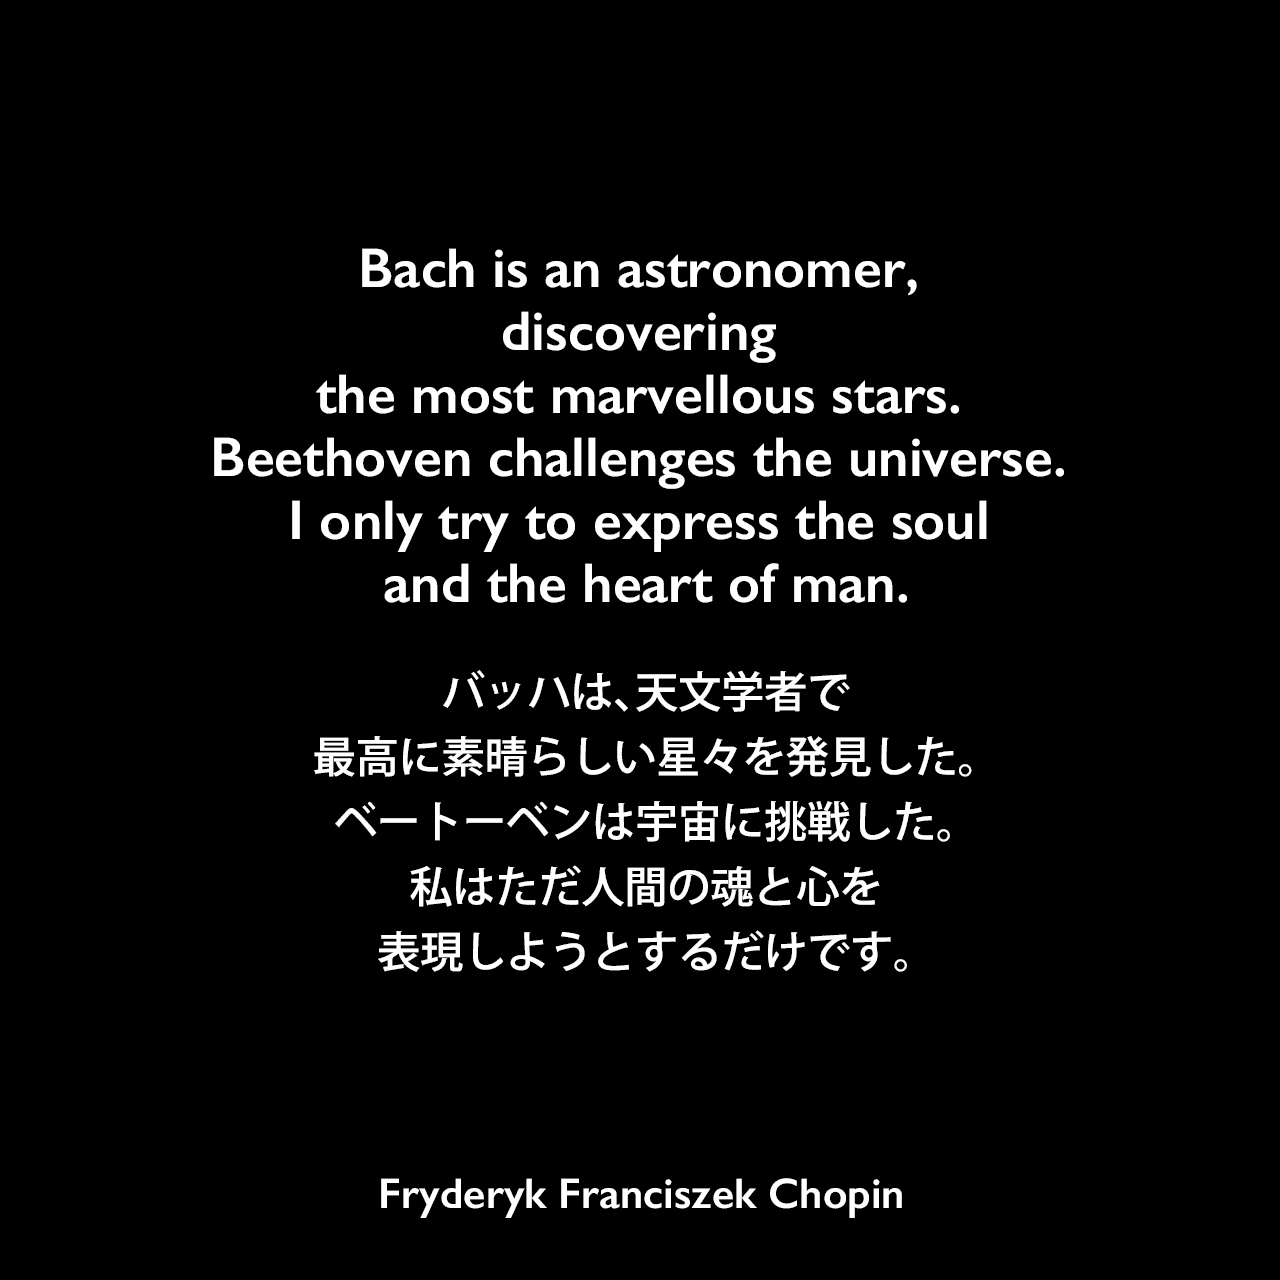 Bach is an astronomer, discovering the most marvellous stars. Beethoven challenges the universe. I only try to express the soul and the heart of man.バッハは、天文学者で最高に素晴らしい星々を発見した。ベートーベンは宇宙に挑戦した。私はただ人間の魂と心を表現しようとするだけです。Fryderyk Franciszek Chopin